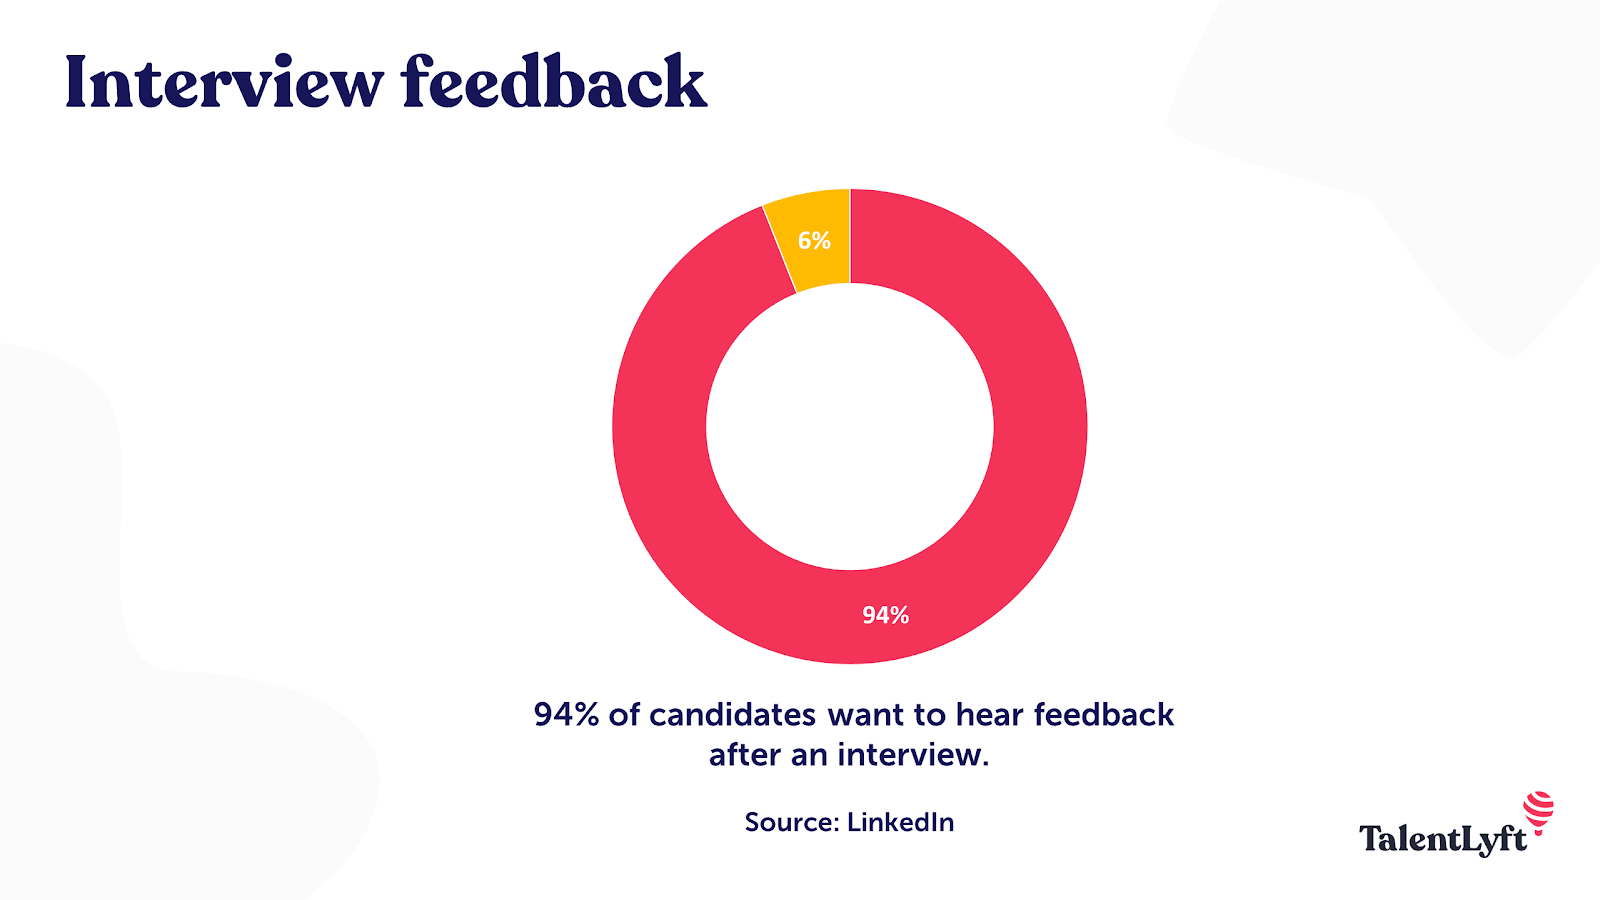 Interview feedback statistic